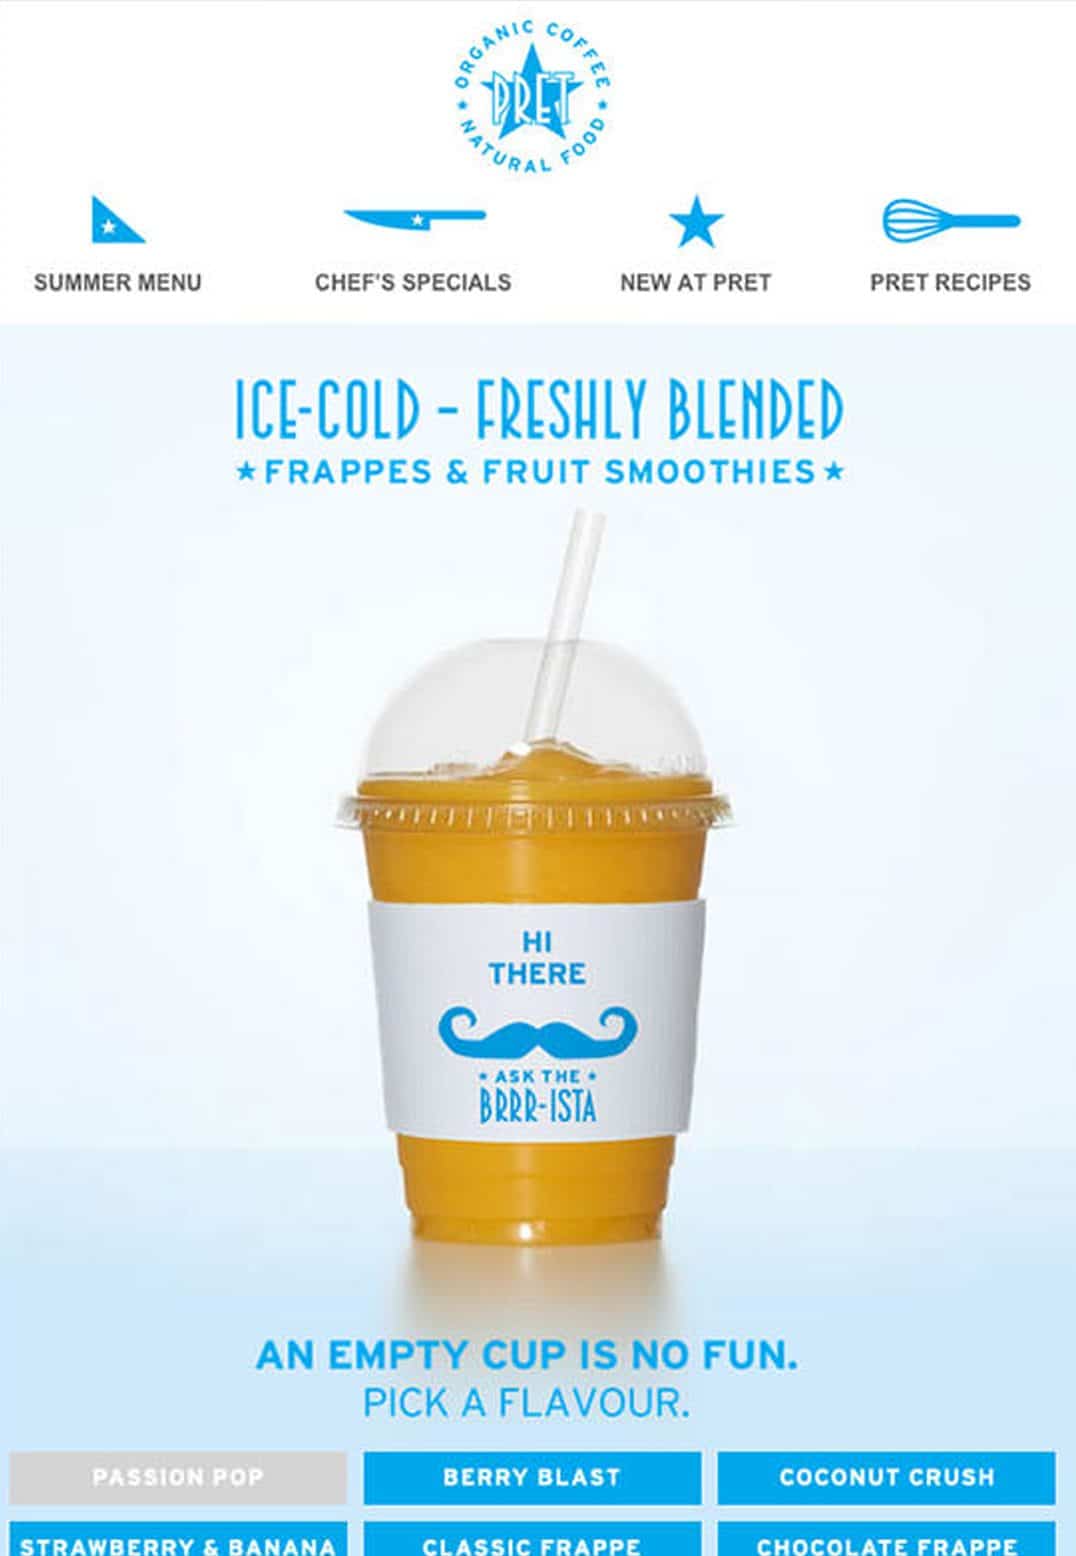 In this email, you can almost taste the icy coldness of the fruity beverage showcased in the photo: